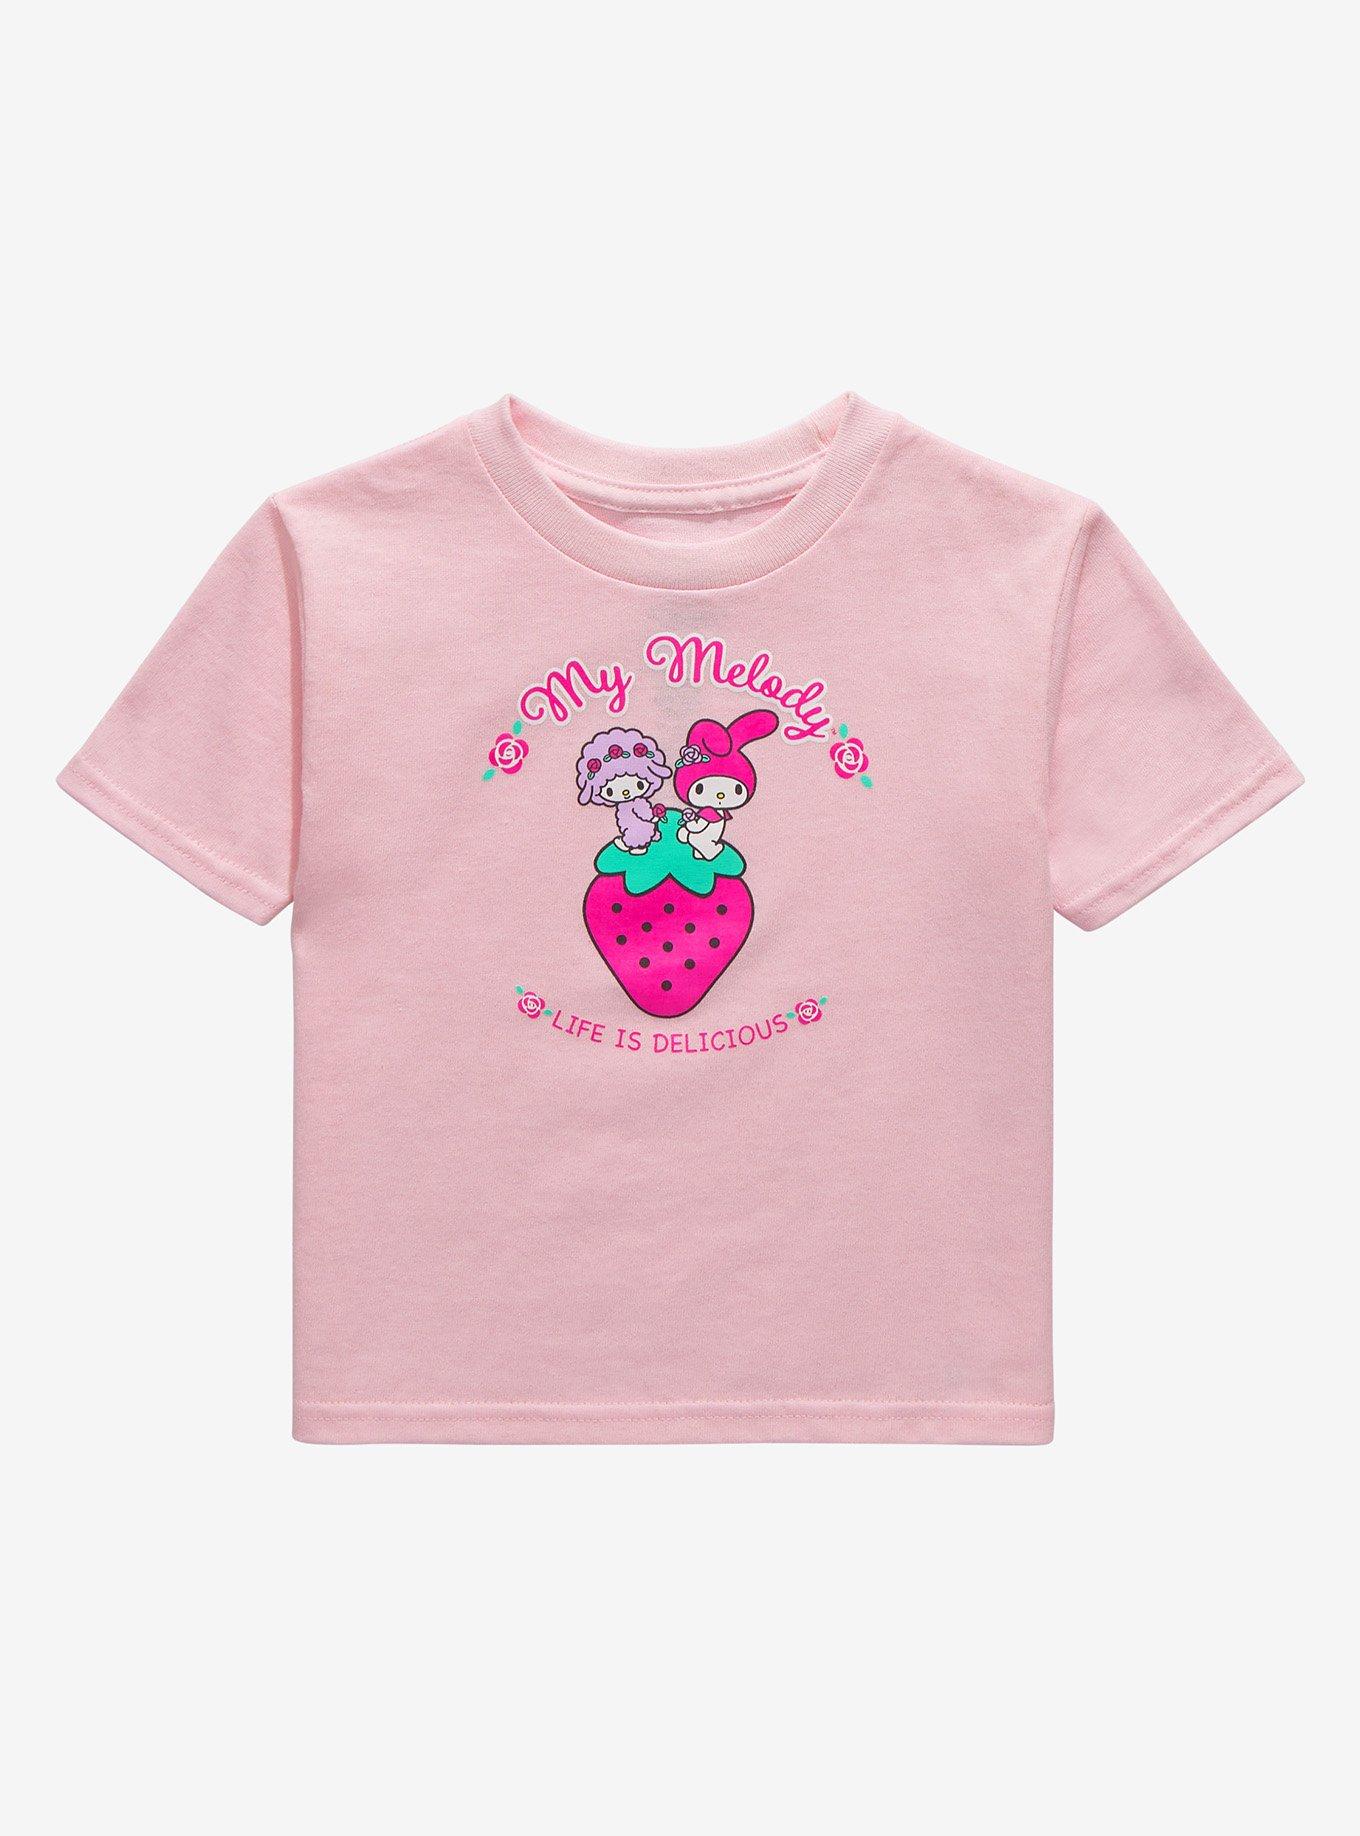 Sanrio My Melody & My Sweet Piano Life is Delicious Toddler T-Shirt -  BoxLunch Exclusive | BoxLunch